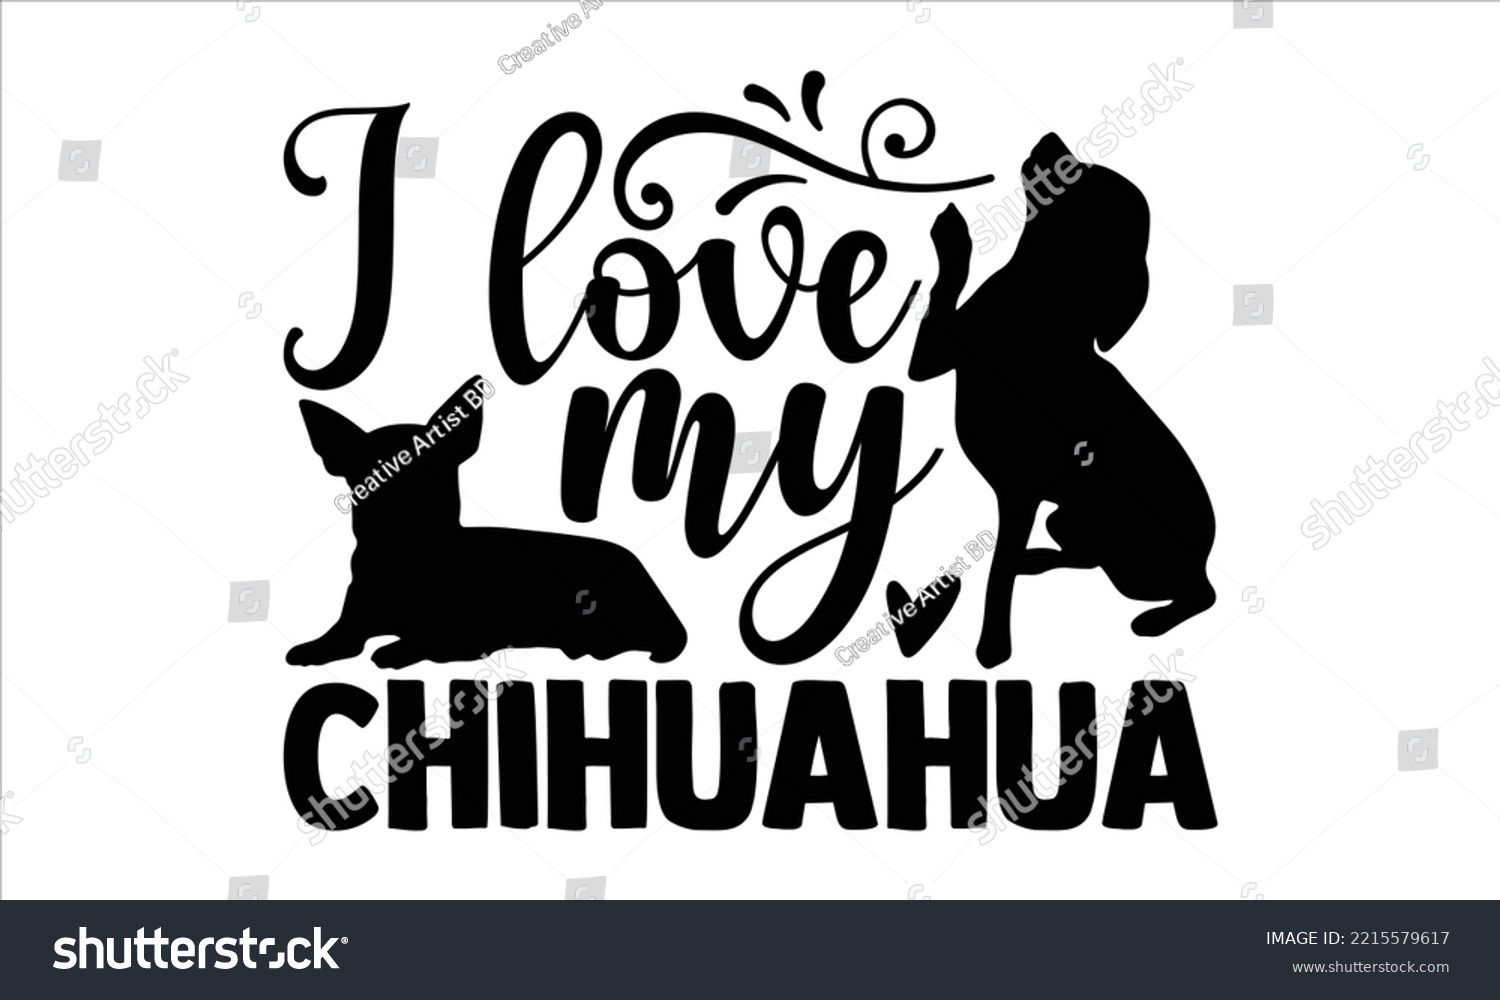 SVG of I Love My Chihuahua - Chihuahua T shirt Design, Hand drawn vintage illustration with hand-lettering and decoration elements, Cut Files for Cricut Svg, Digital Download svg